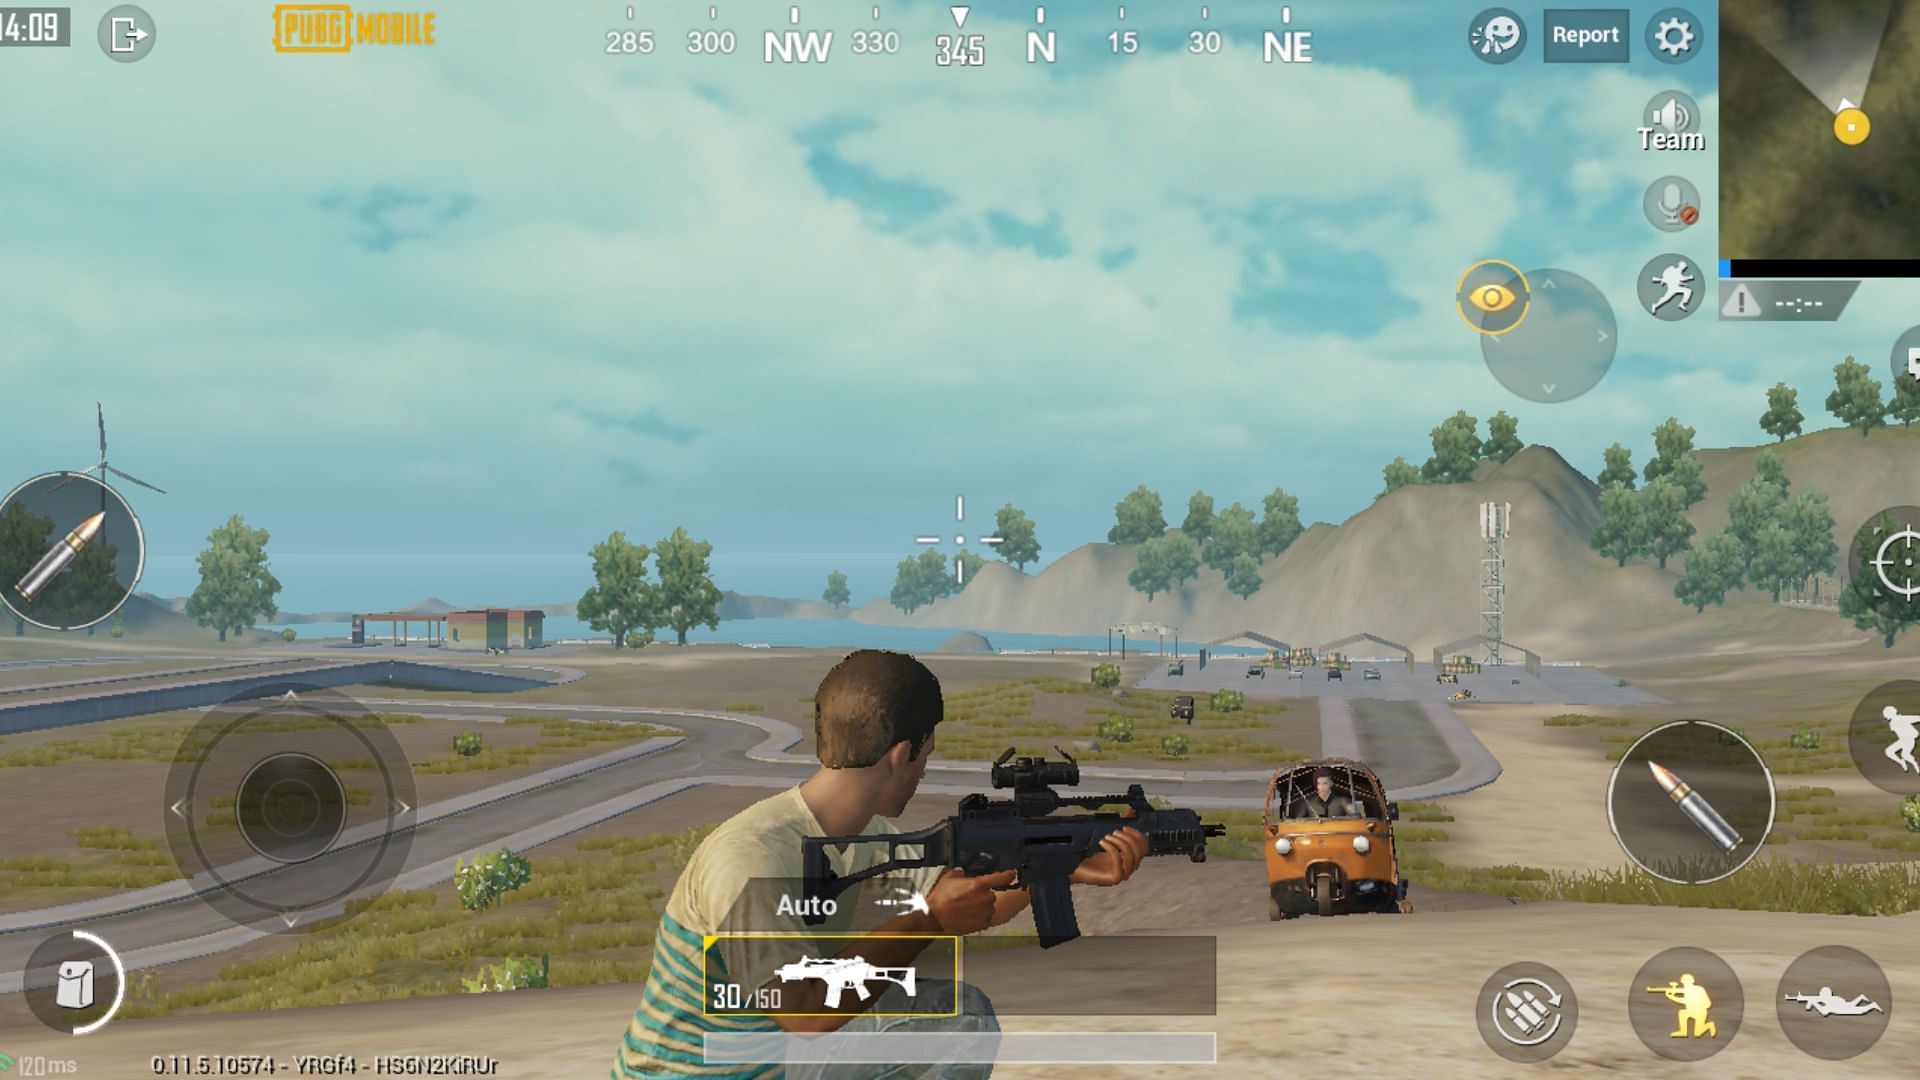 Pubg Mobile Beta Latest Update Here S How You Can Download The New Pubg Beta Update And New Features